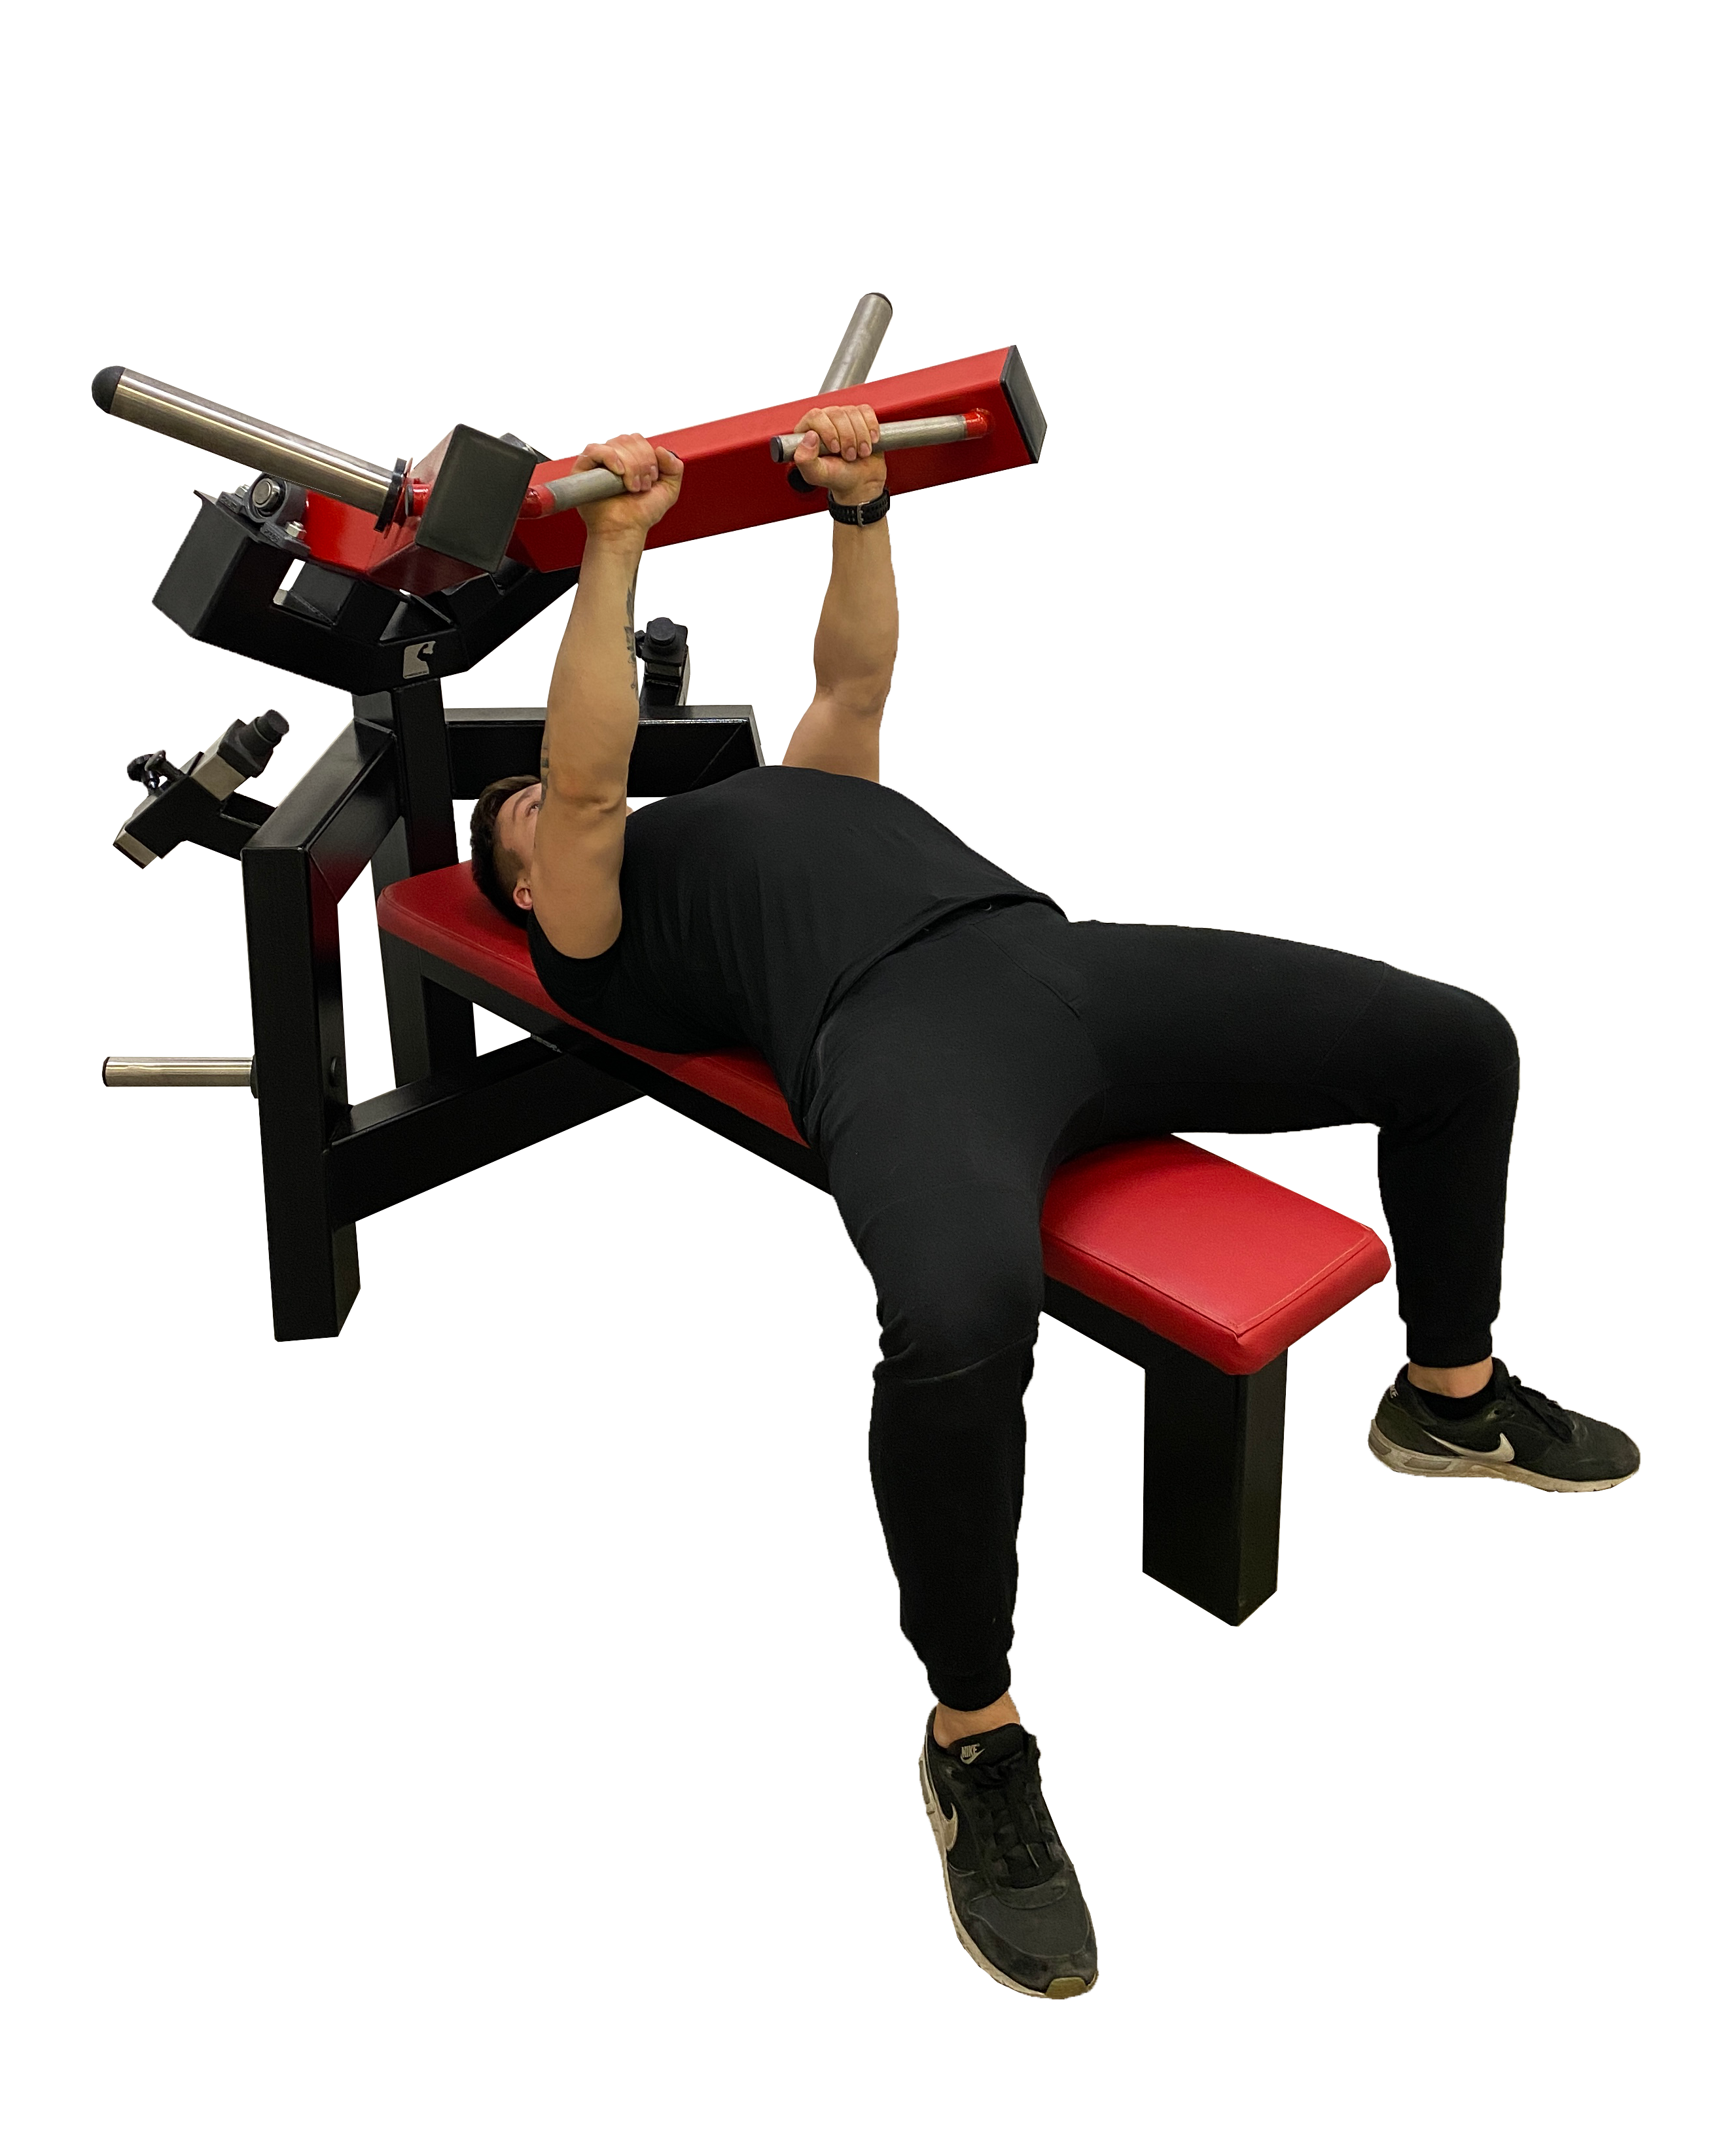 Adjustable Chest Press Bench, For Gym at Rs 14500 in Meerut